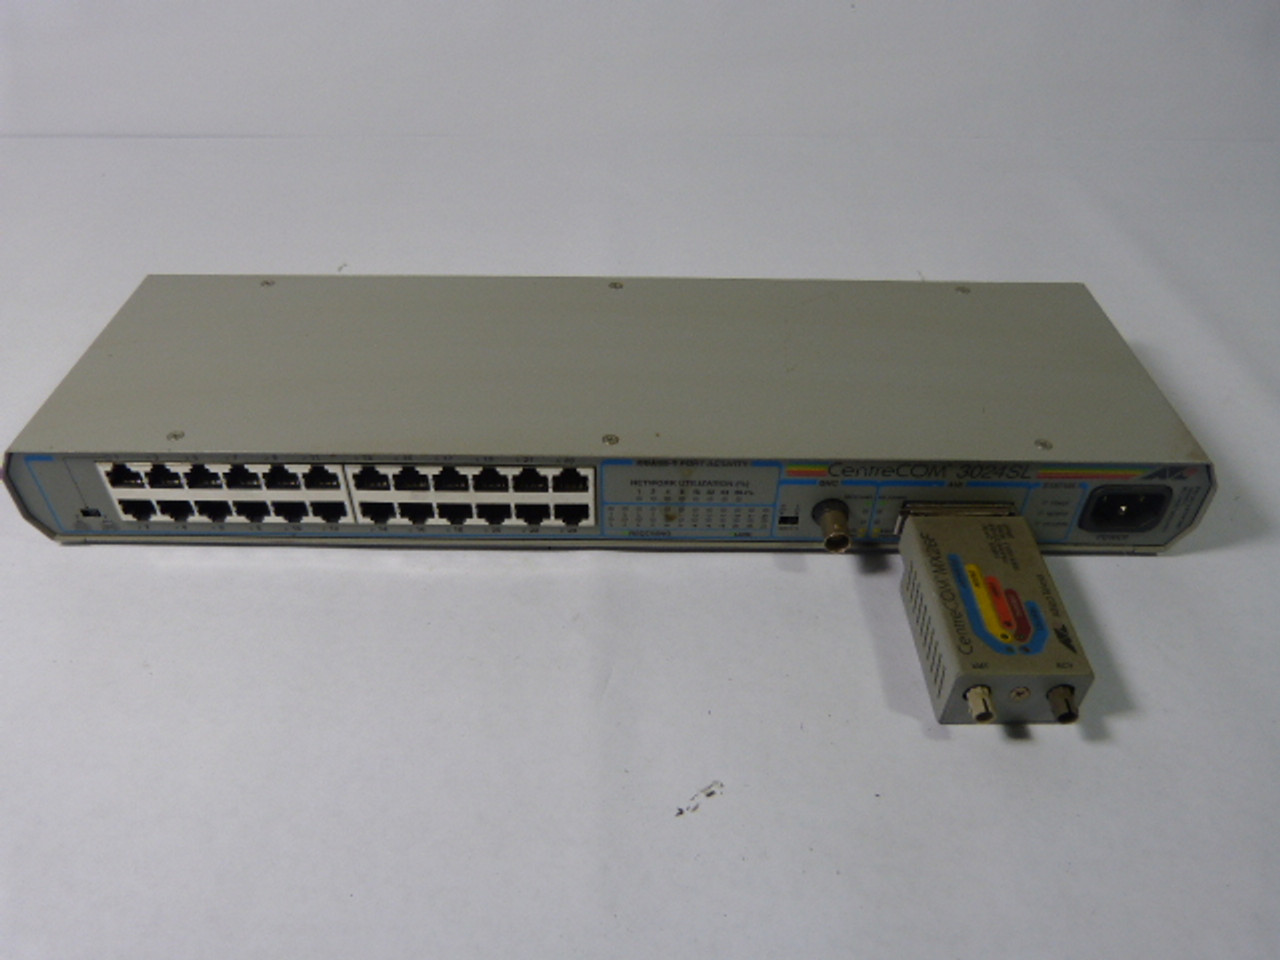 Allied Telesyn 3024SL/MX26F Multiport Repeater with Transceiver USED